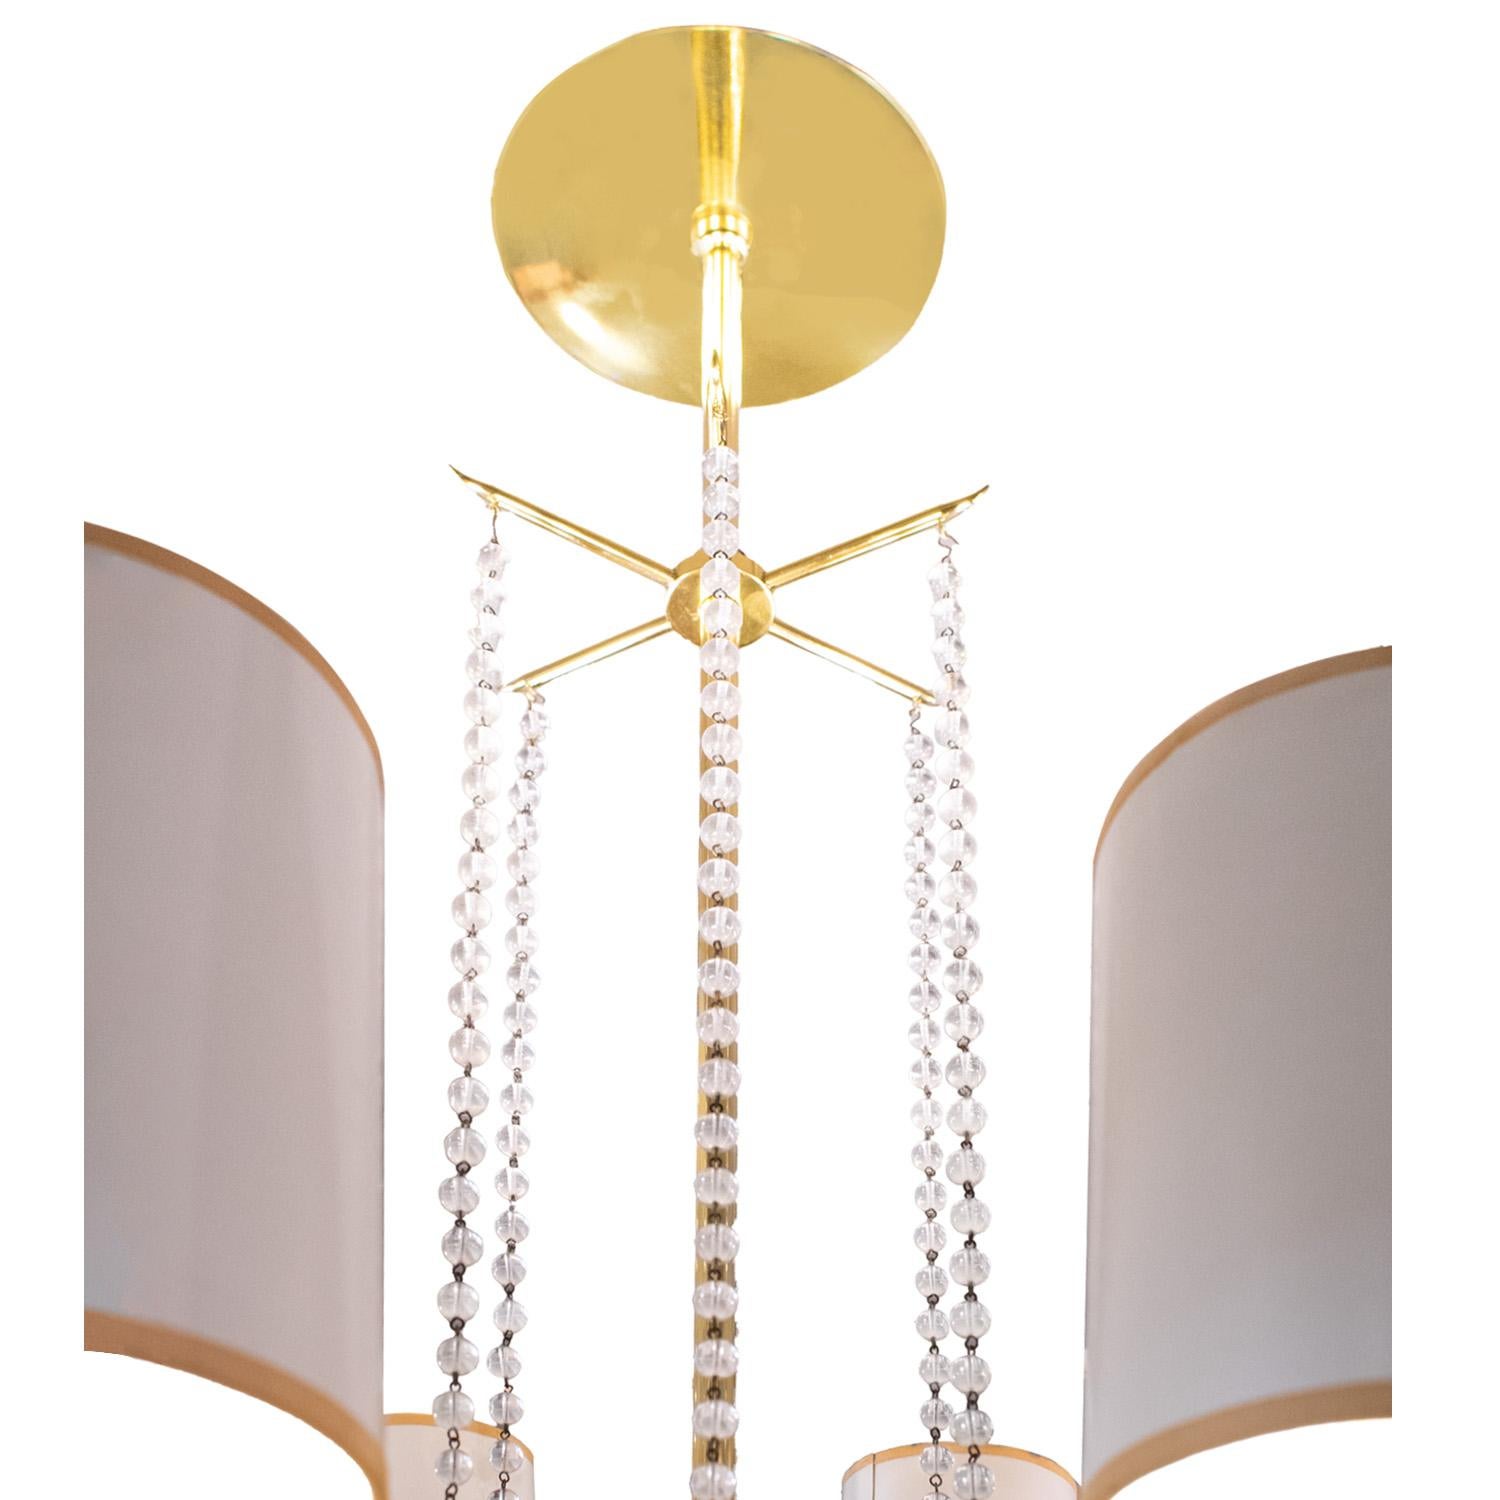 Hand-Crafted Tommi Parzinger Elegant 6 Arm Chandelier in Brass with Crystal Beads 1950s For Sale